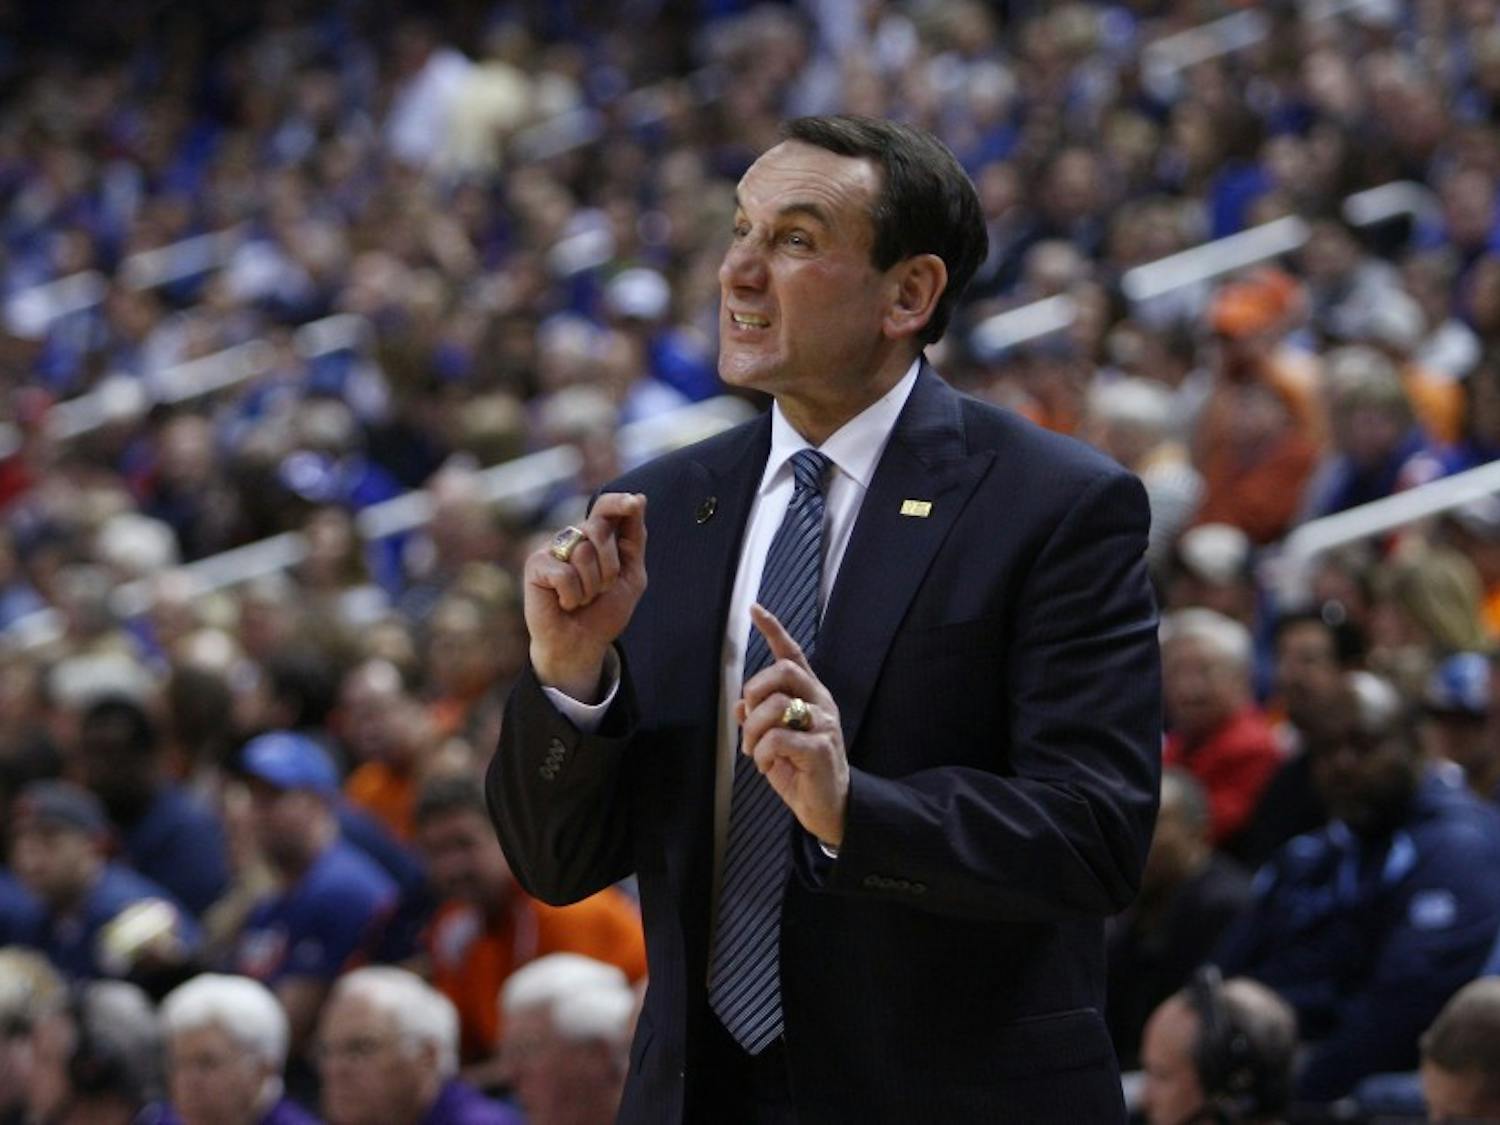 In his farewell column, senior Andrew Beaton writes that he may have learned as many lessons from Blue Devil head coach Mike Krzyzewski as he did in his four years at Duke.